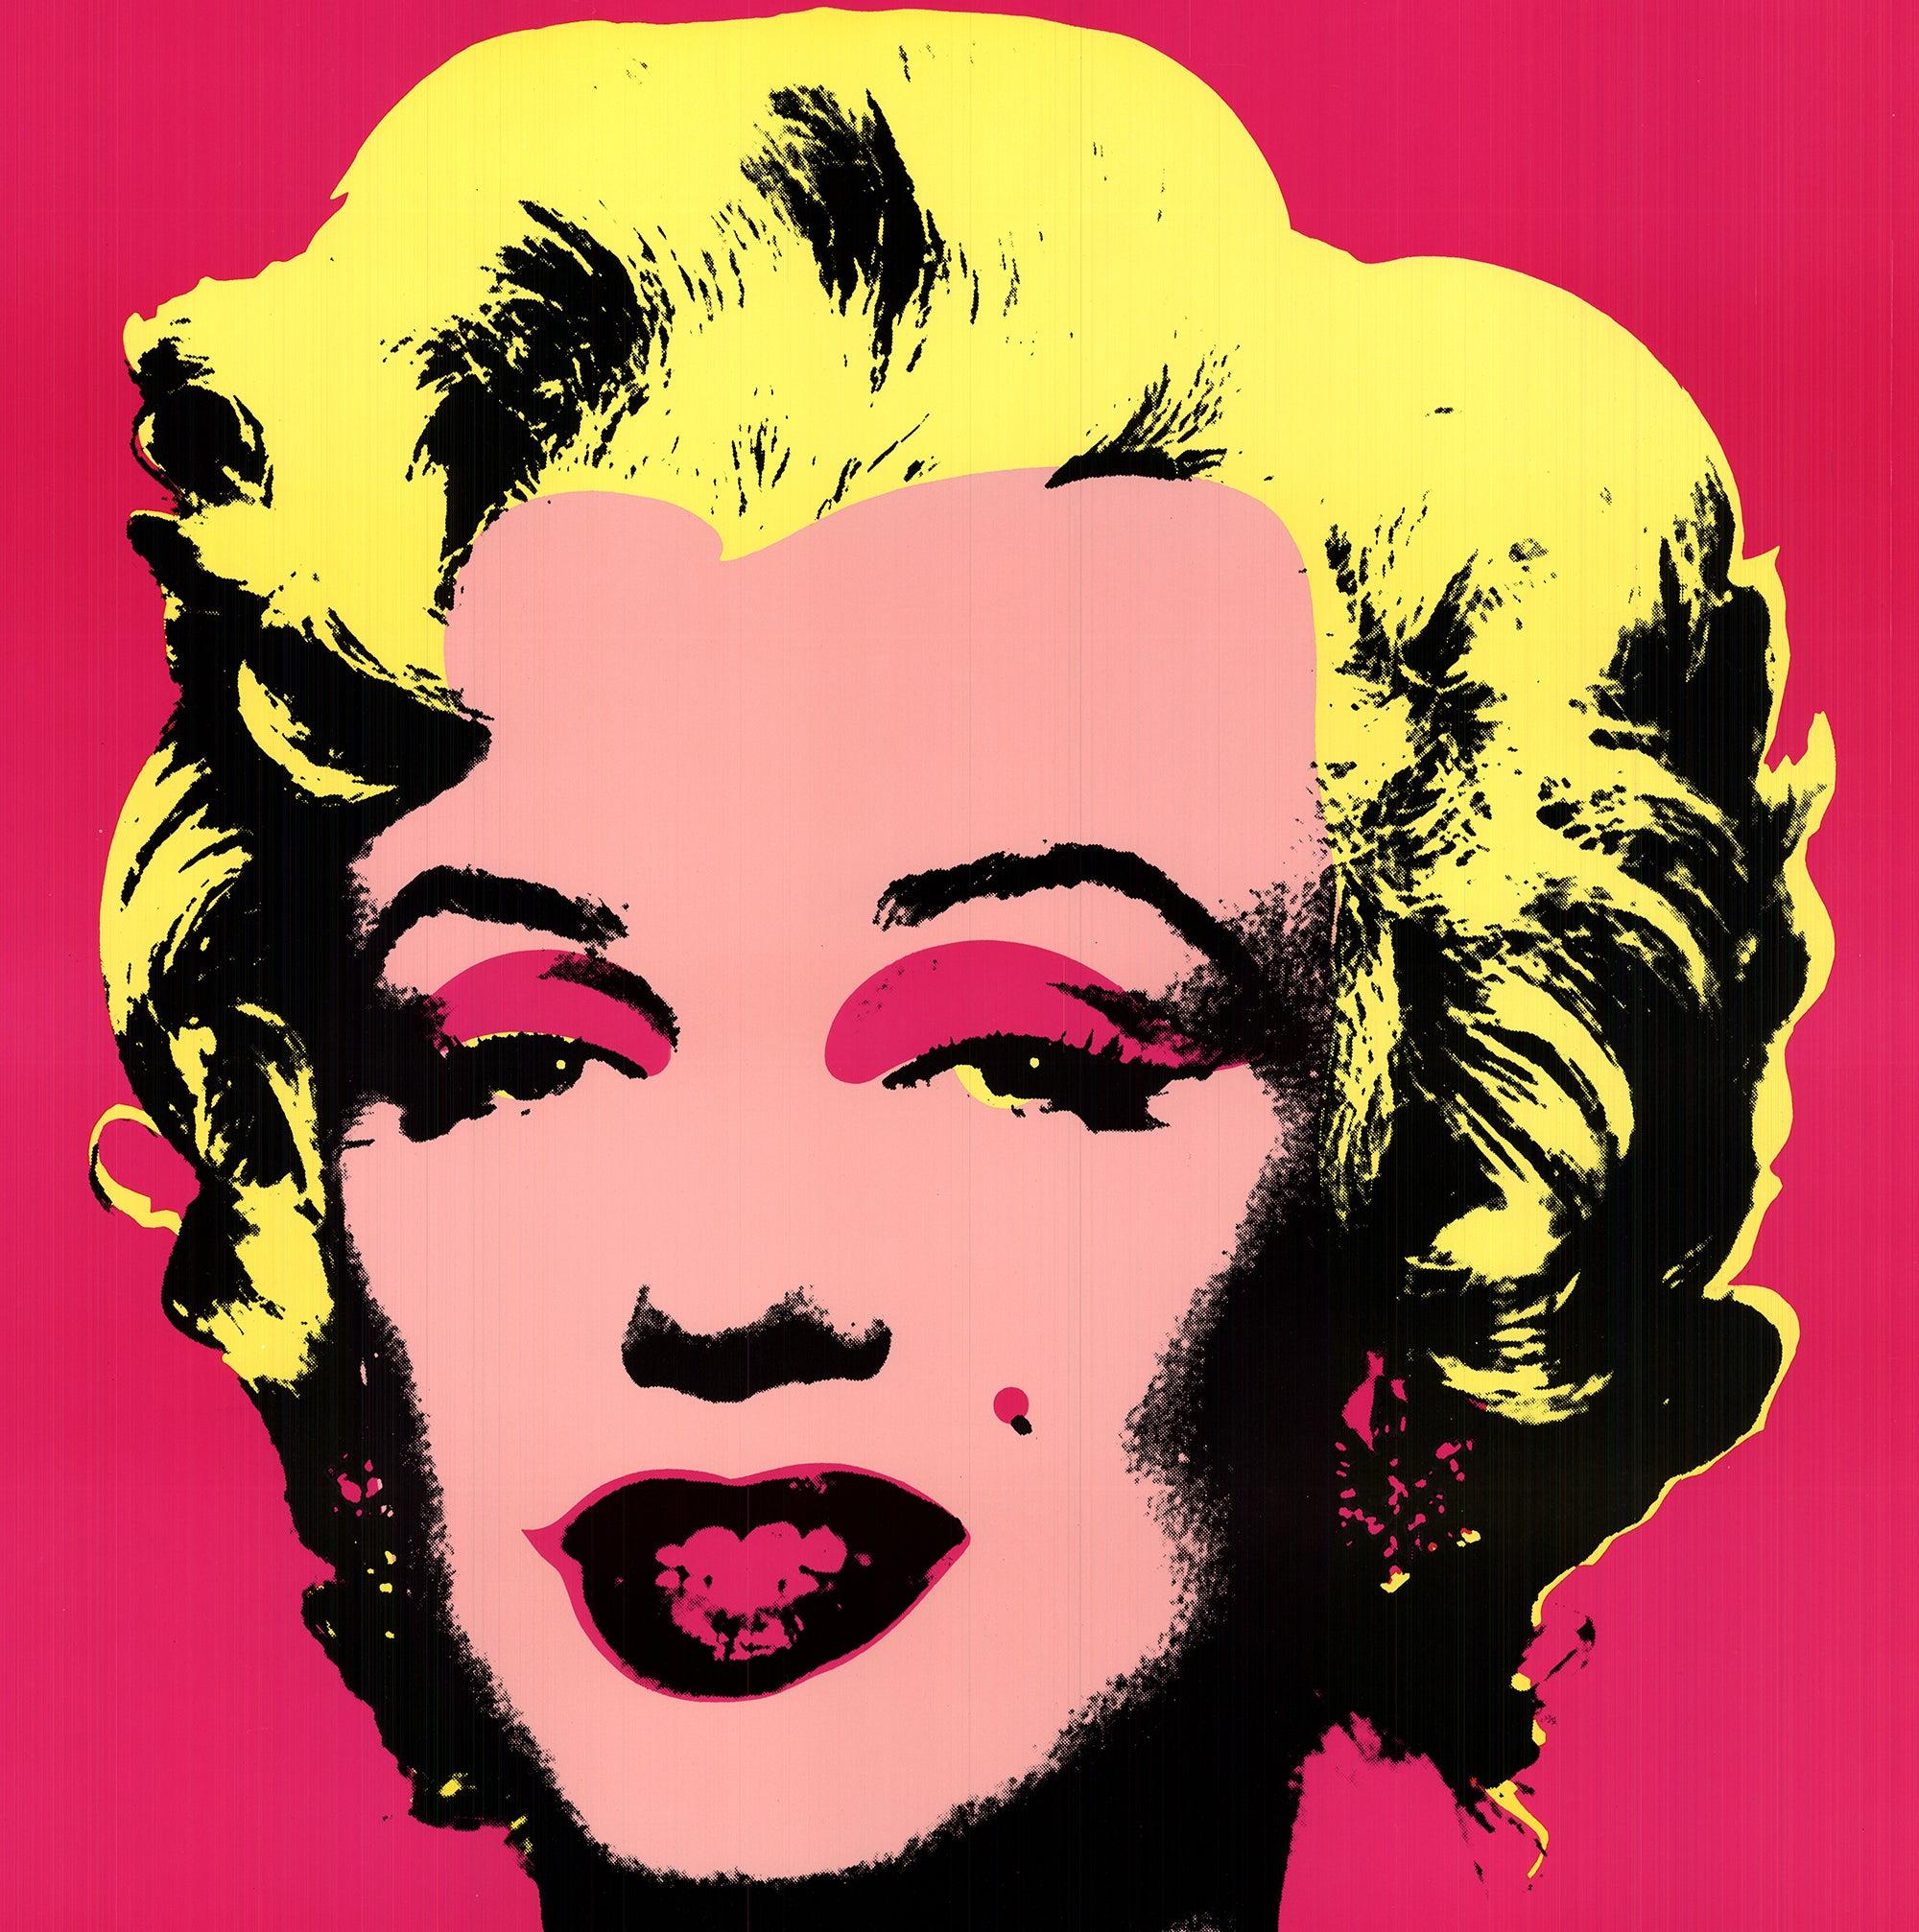 Andy Warhol « Marilyn Pink » 1987- Lithographie offset en vente 1